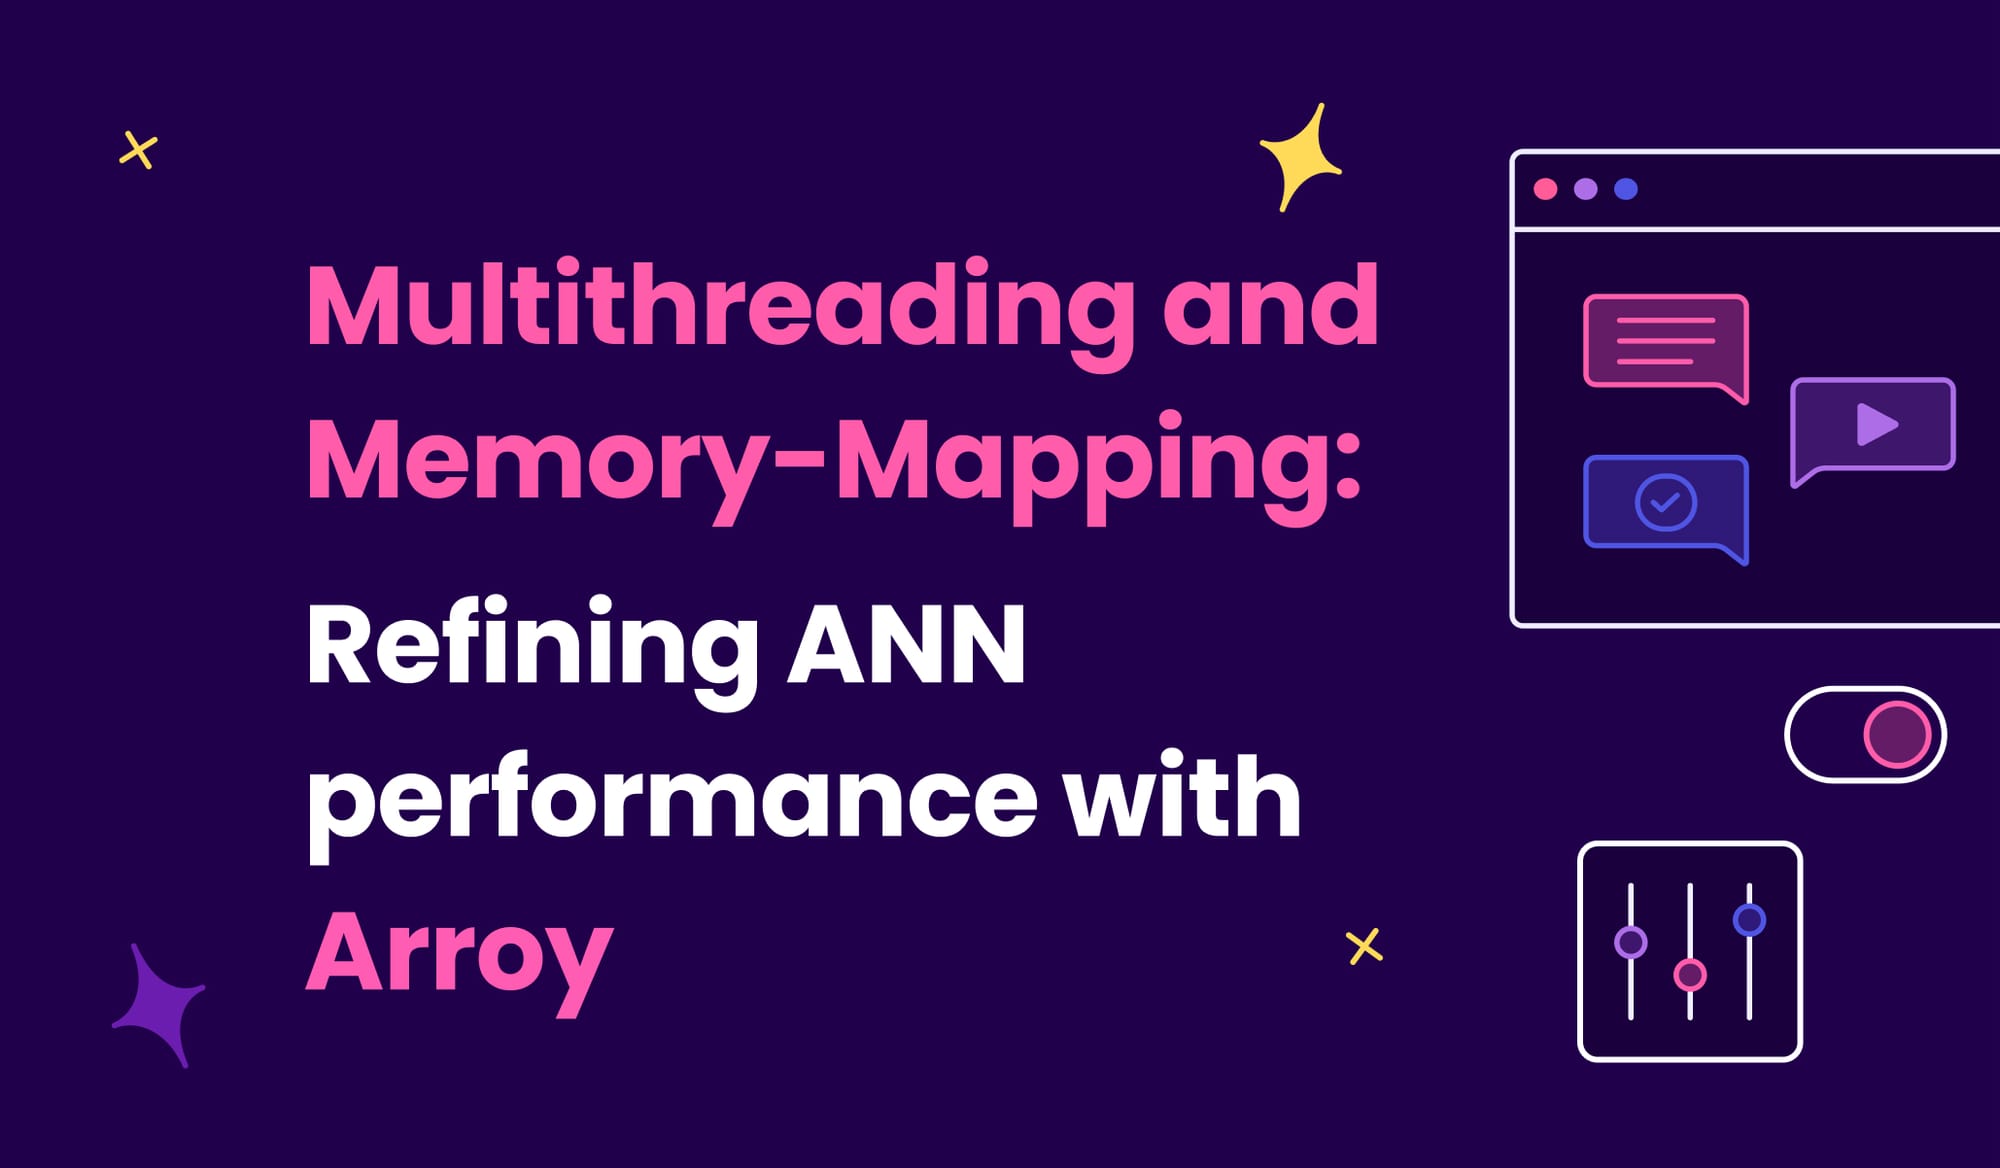 Multithreading and Memory-Mapping: Refining ANN performance with Arroy